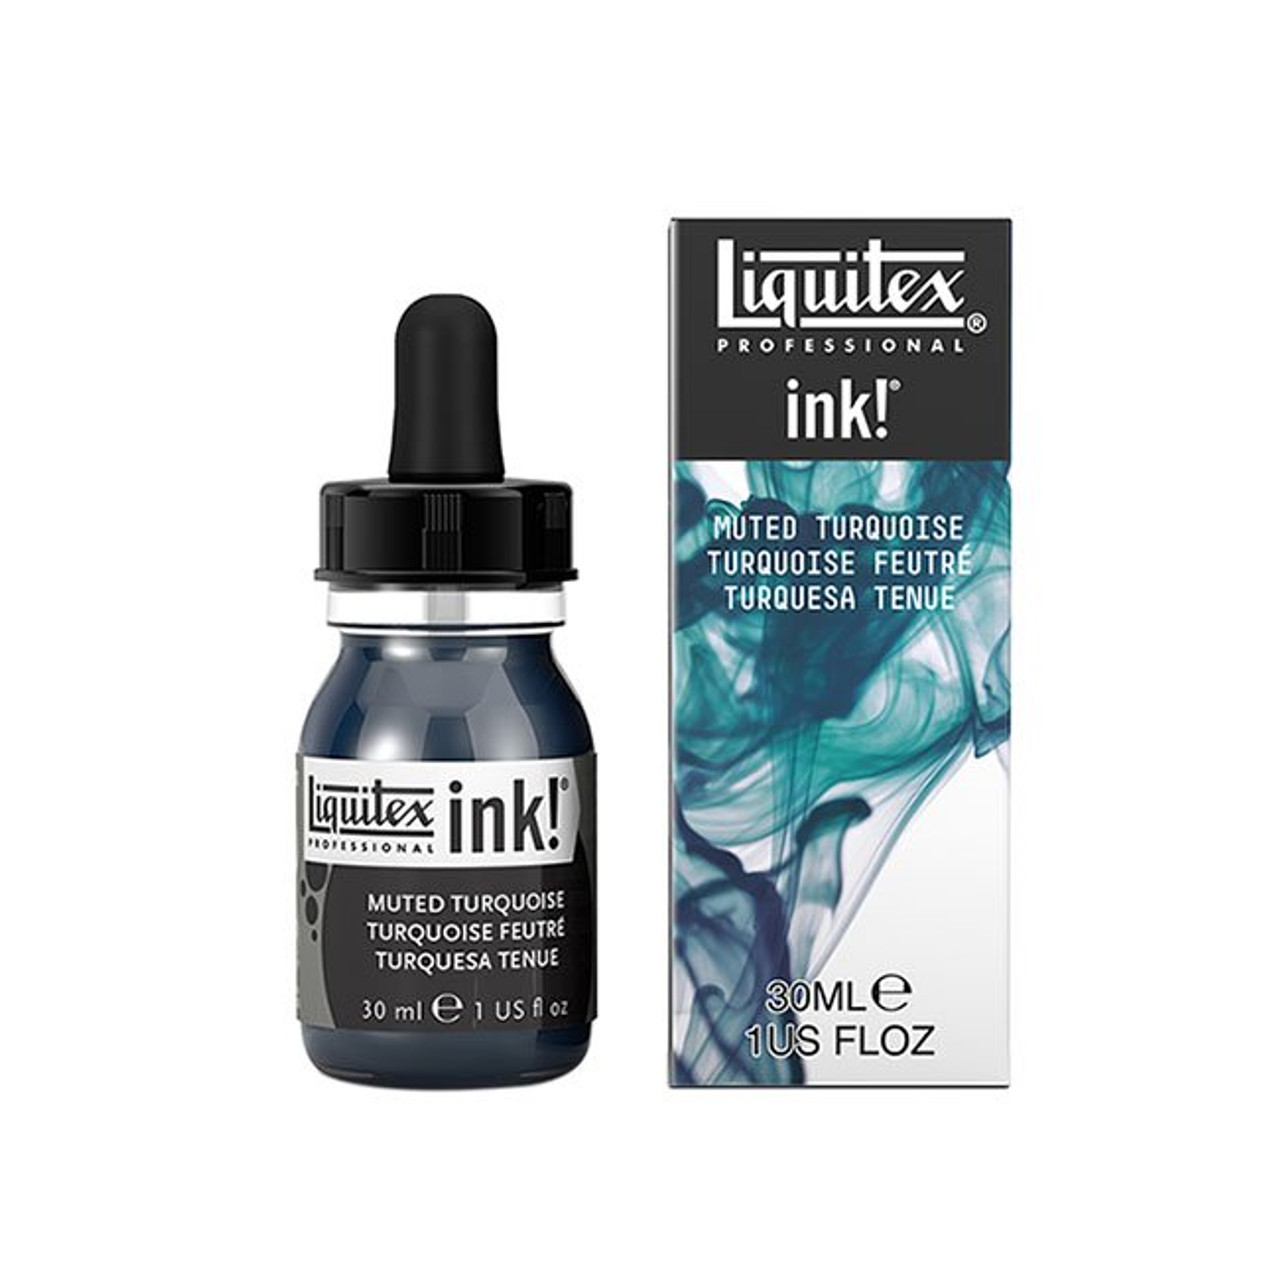 Liquitex Acrylic Ink Professional Paint, Muted Colors Collection Set